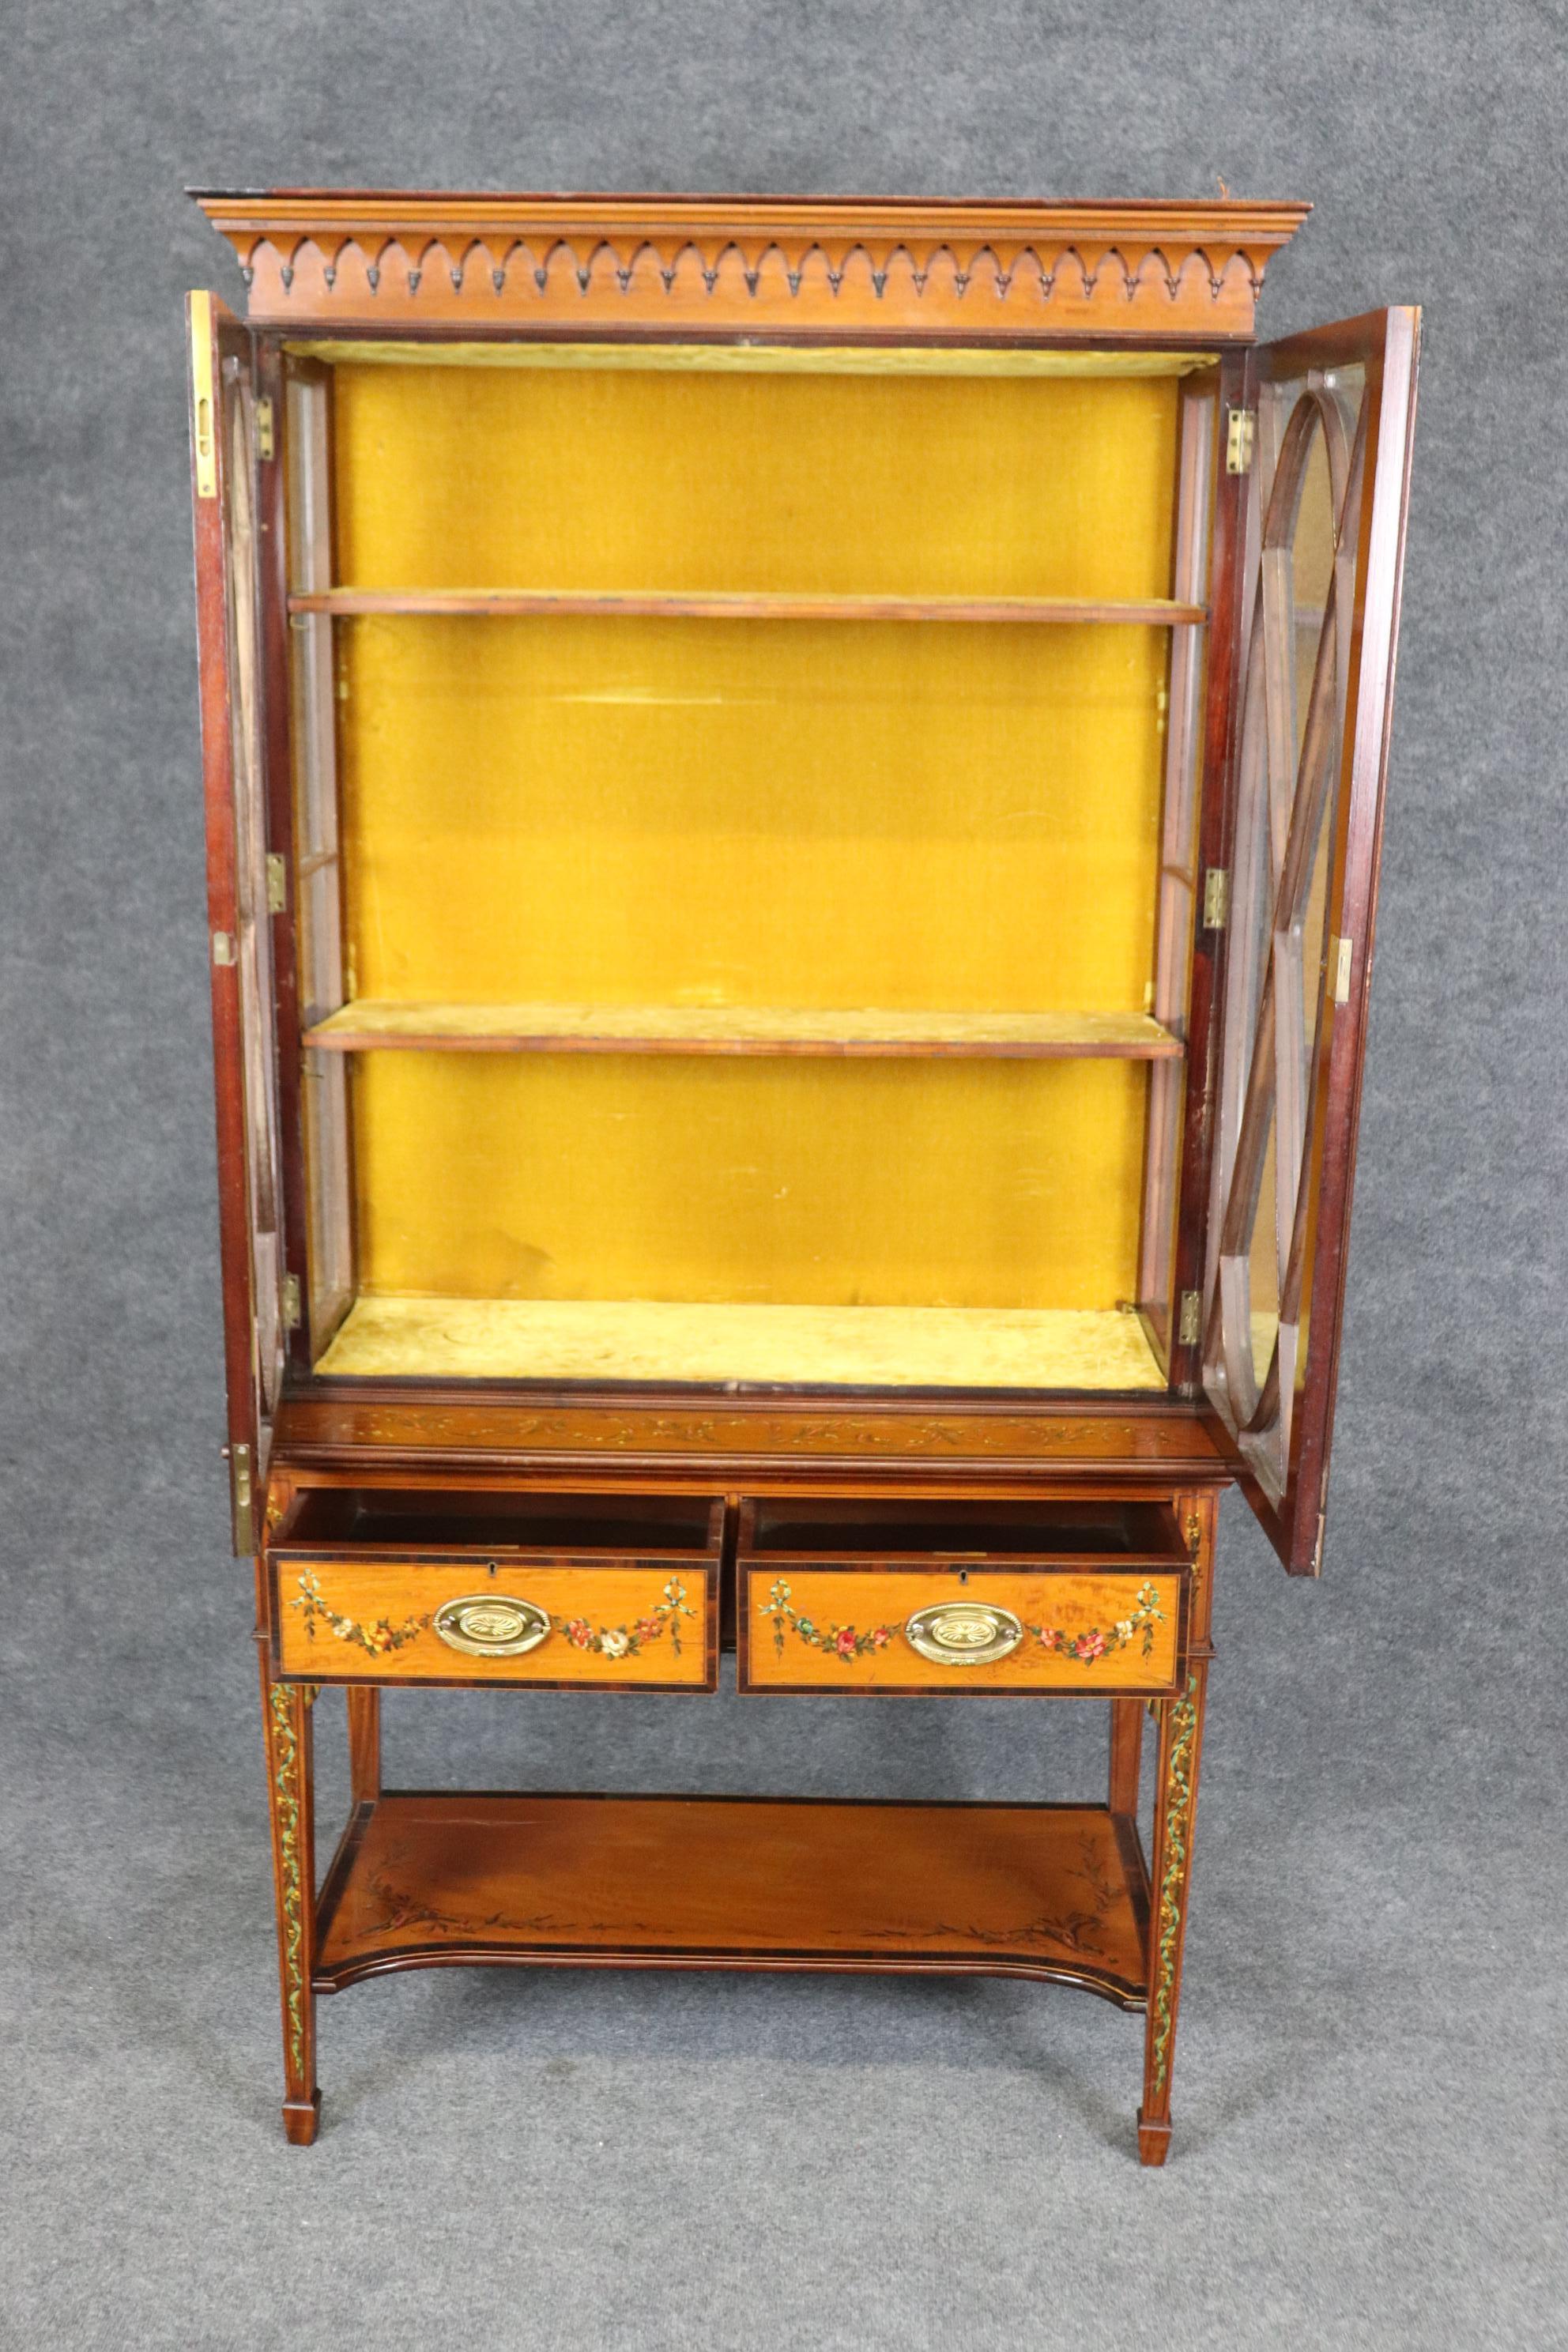 This is a fantastic English-made Edwardian vitrine made of walnut and satinwood. The cabinet is in good antique condition with minor signs of age and wear but nothing significant. The cabinet is a gem. Measures 78 tall x 40.5 wide x 19 deep. The